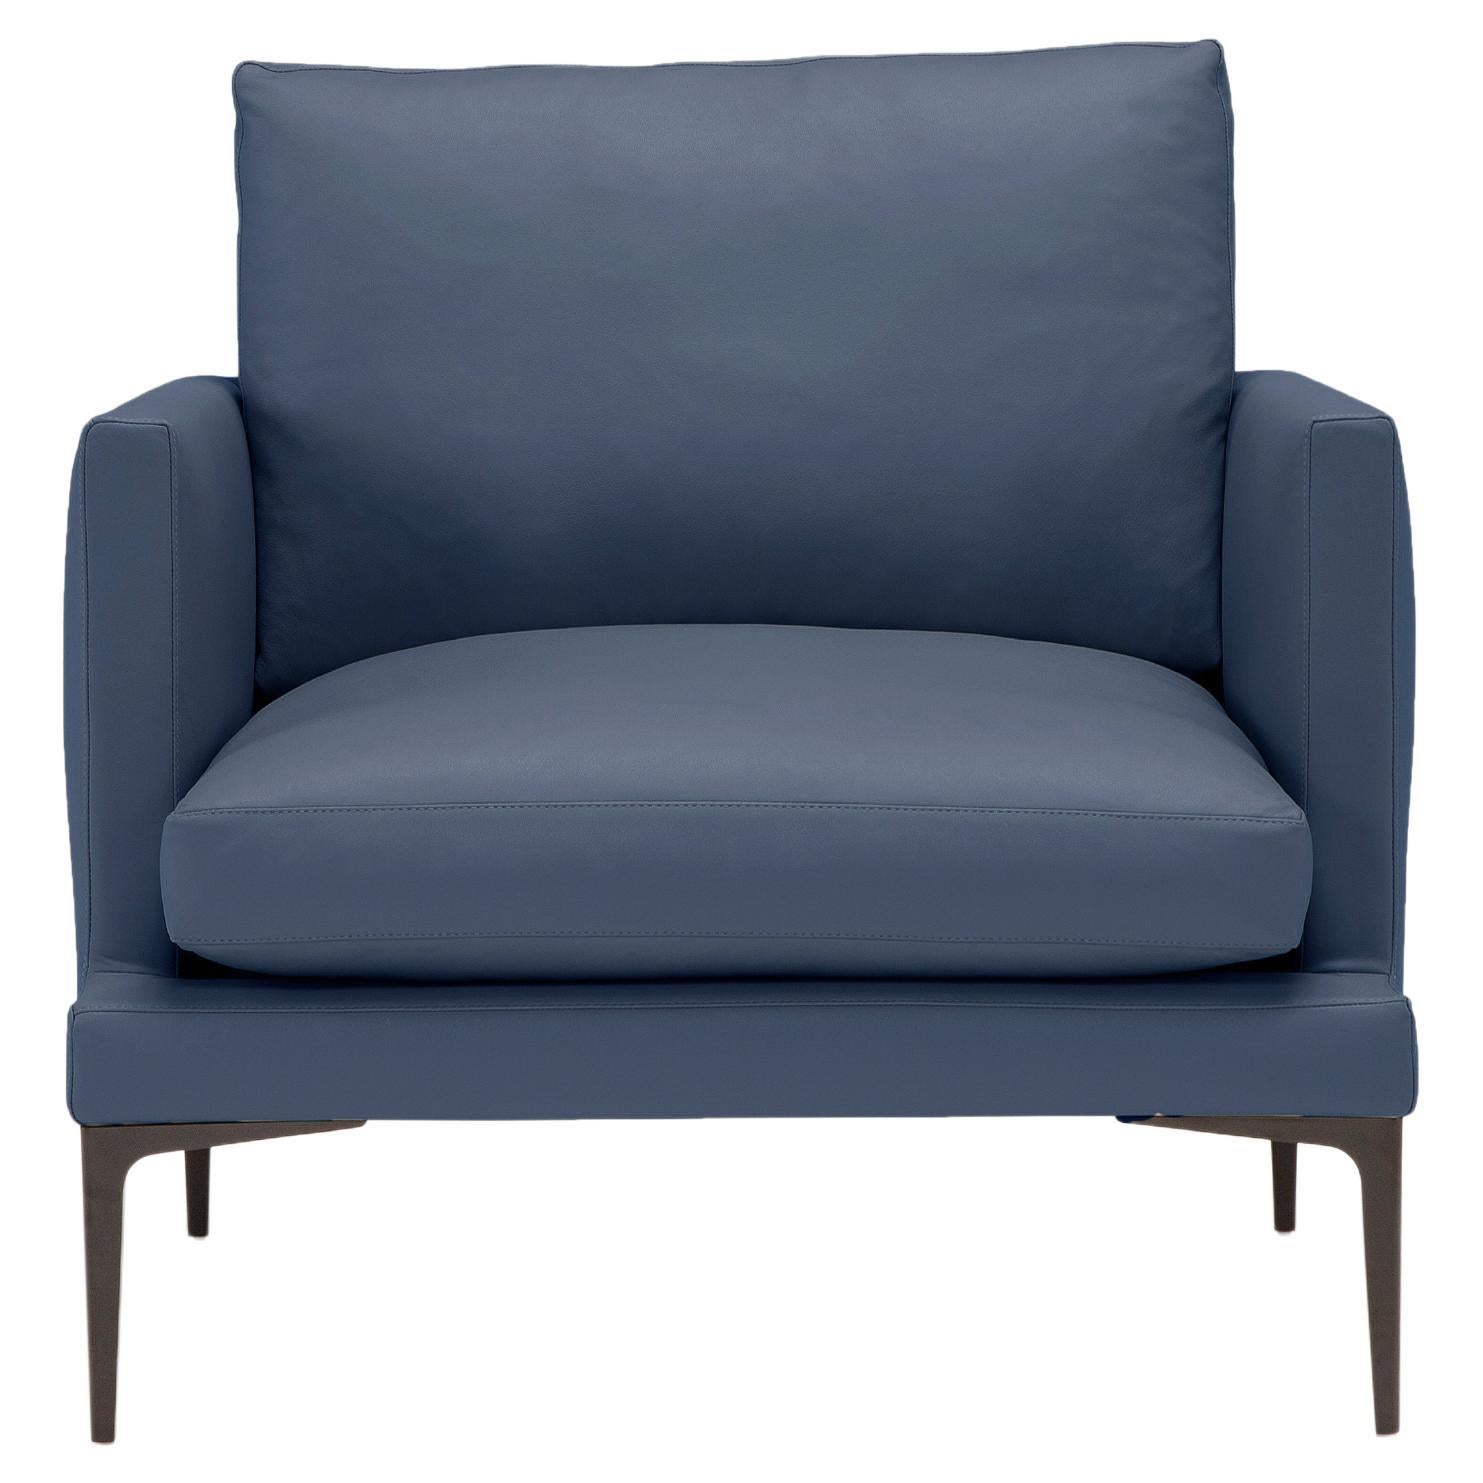 Amura 'Segno' Armchair in Blue Leather by Amura 'Lab